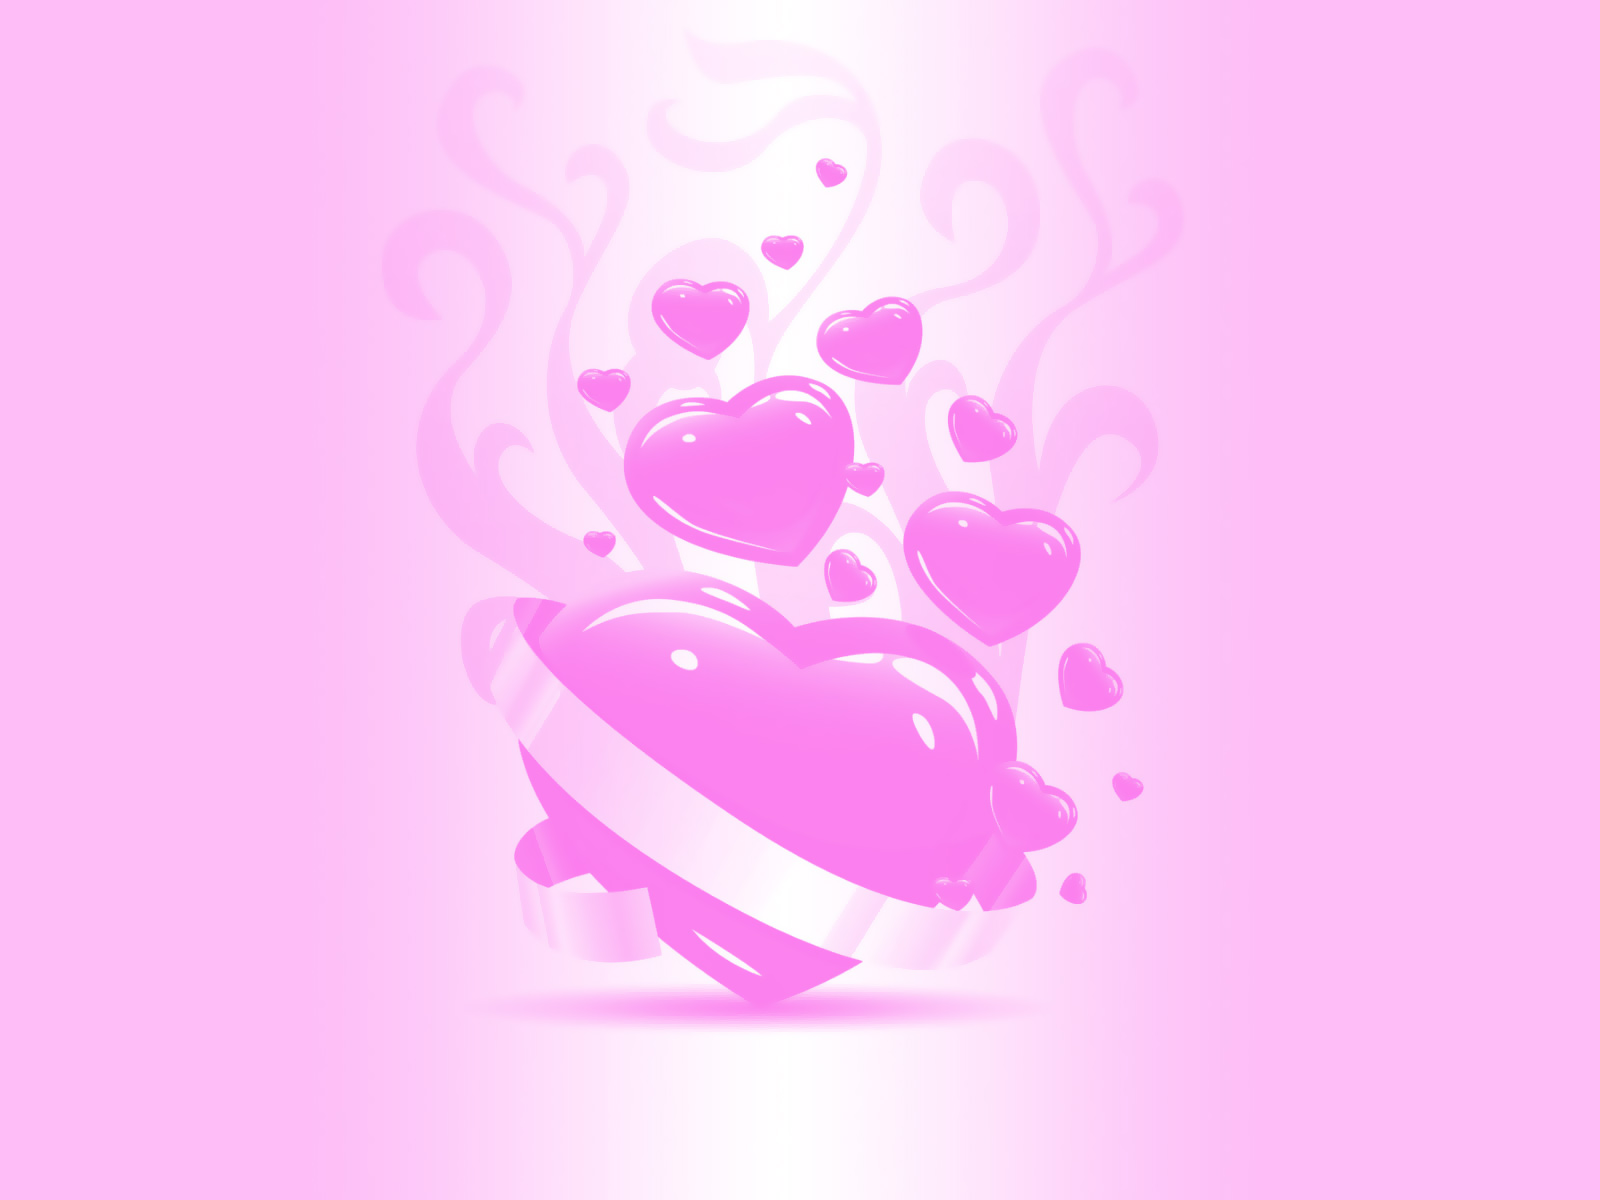 A pink heart shaped object on a pink background photo  Render Image on  Unsplash